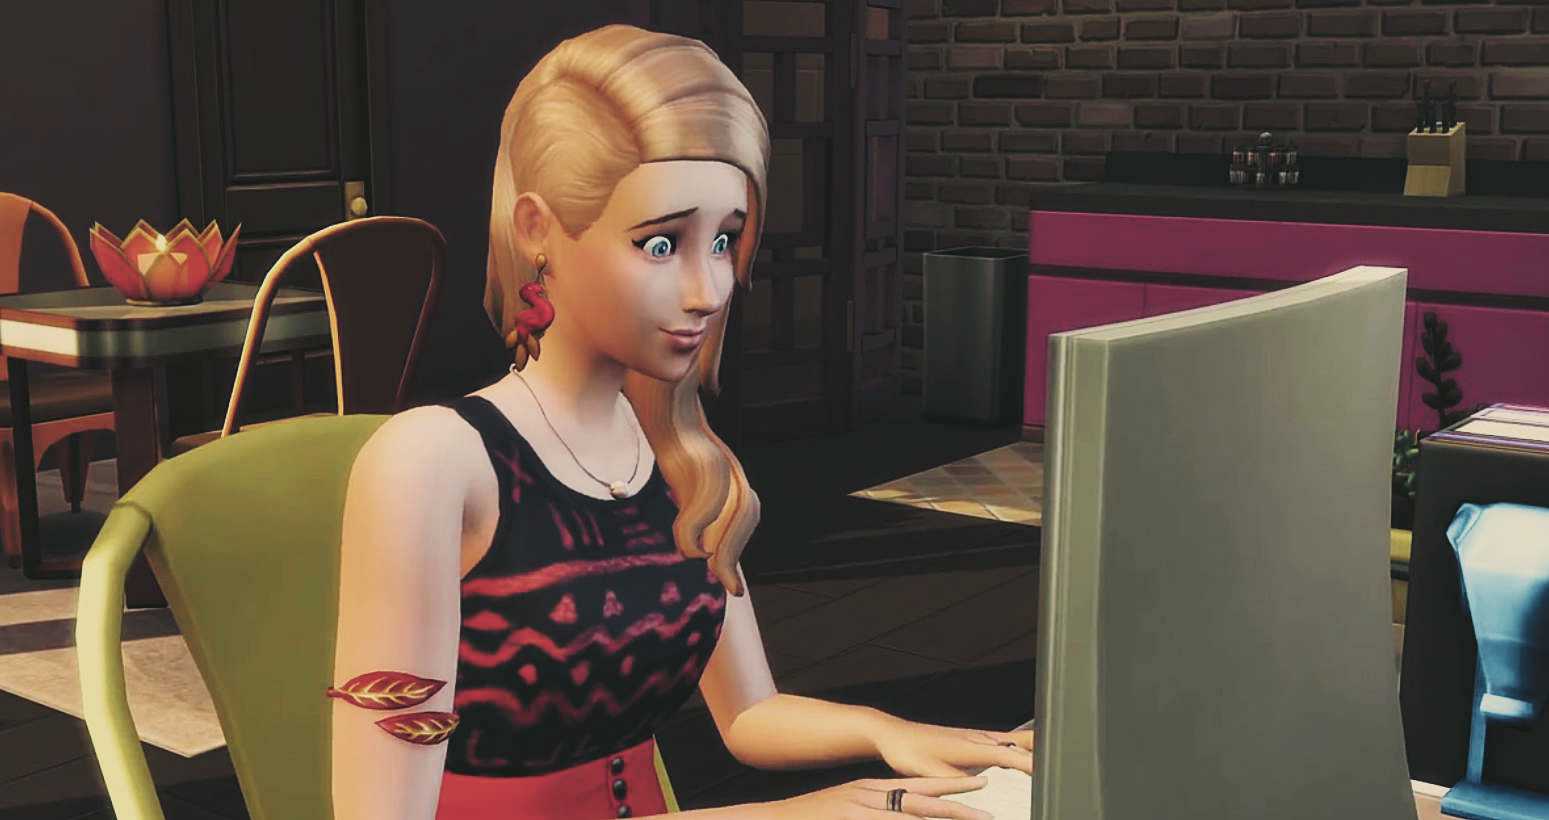 sims 4 latest patch notes